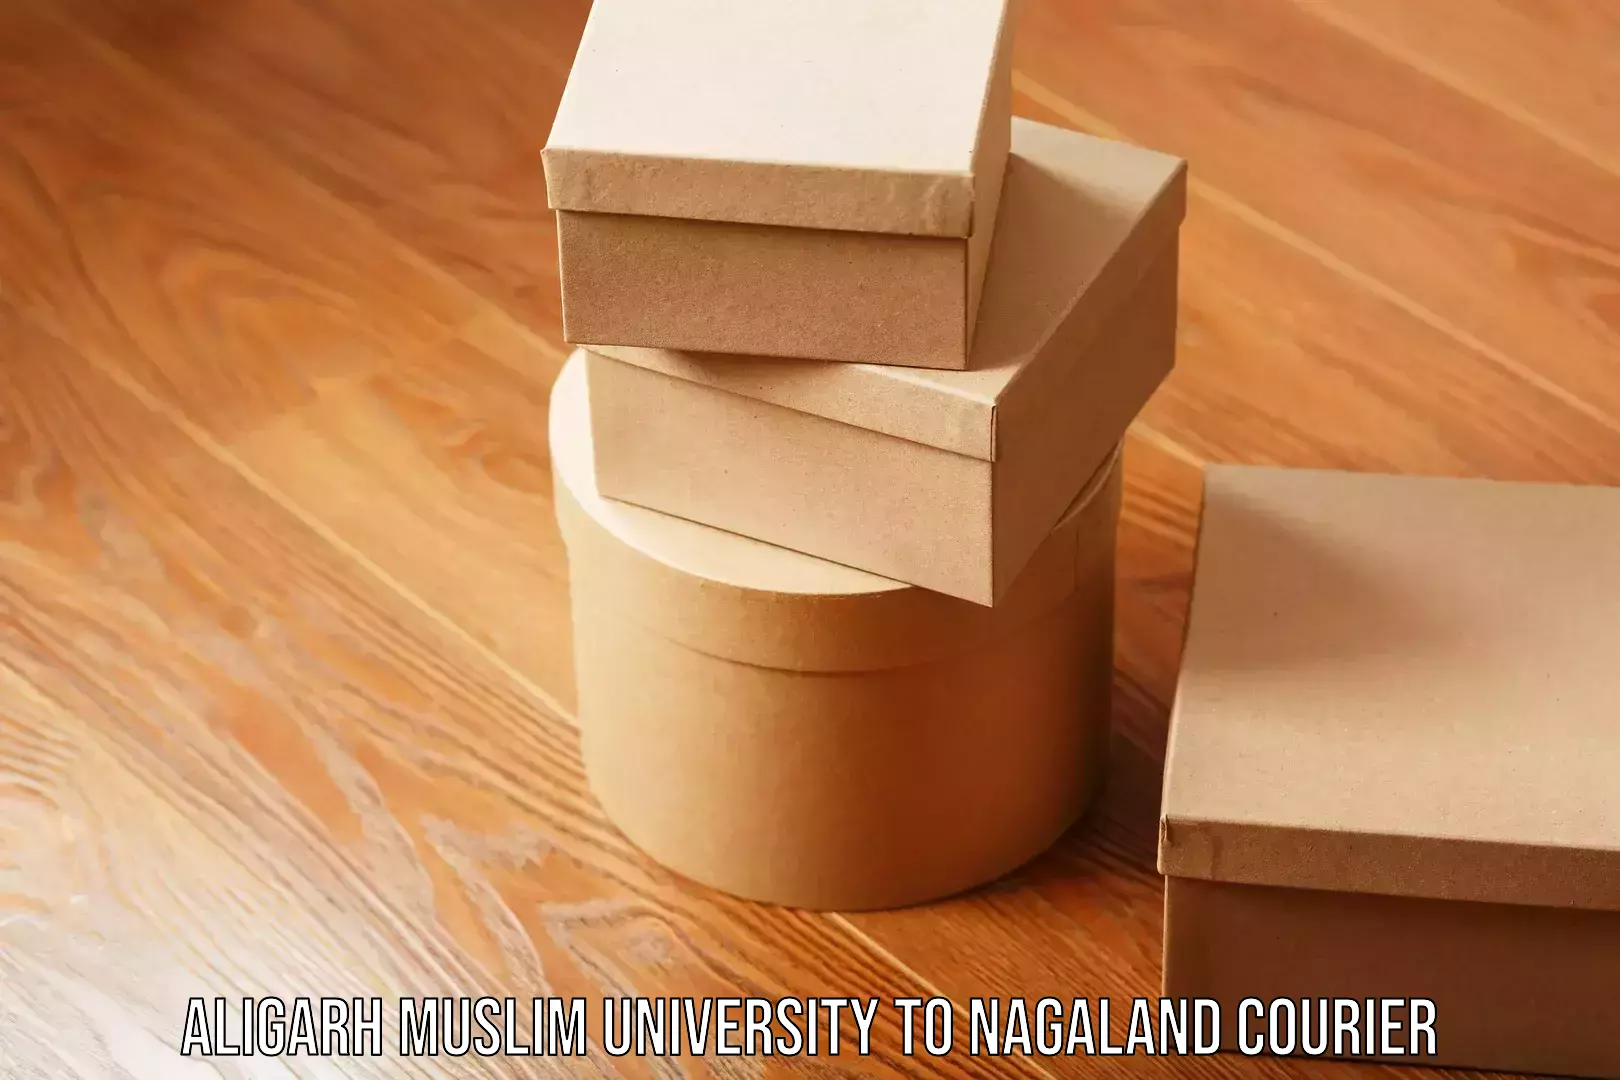 End-to-end delivery Aligarh Muslim University to Nagaland